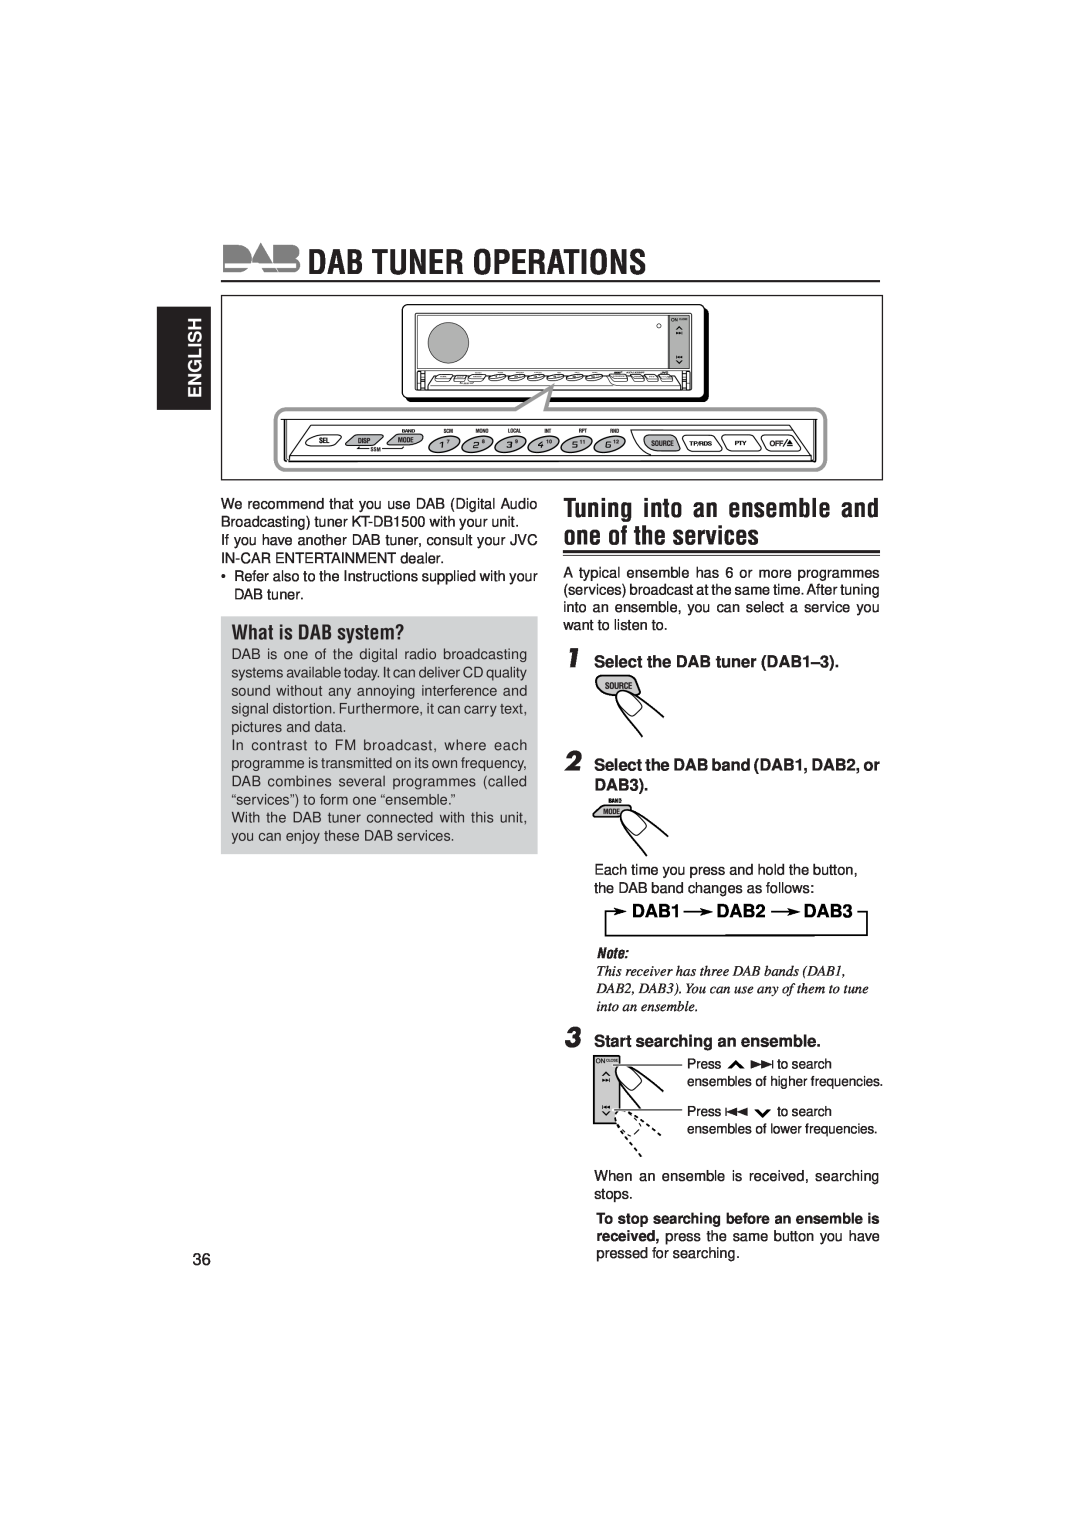 JVC KD-LX330R Dab Tuner Operations, Tuning into an ensemble and one of the services, What is DAB system?, English, DAB1 